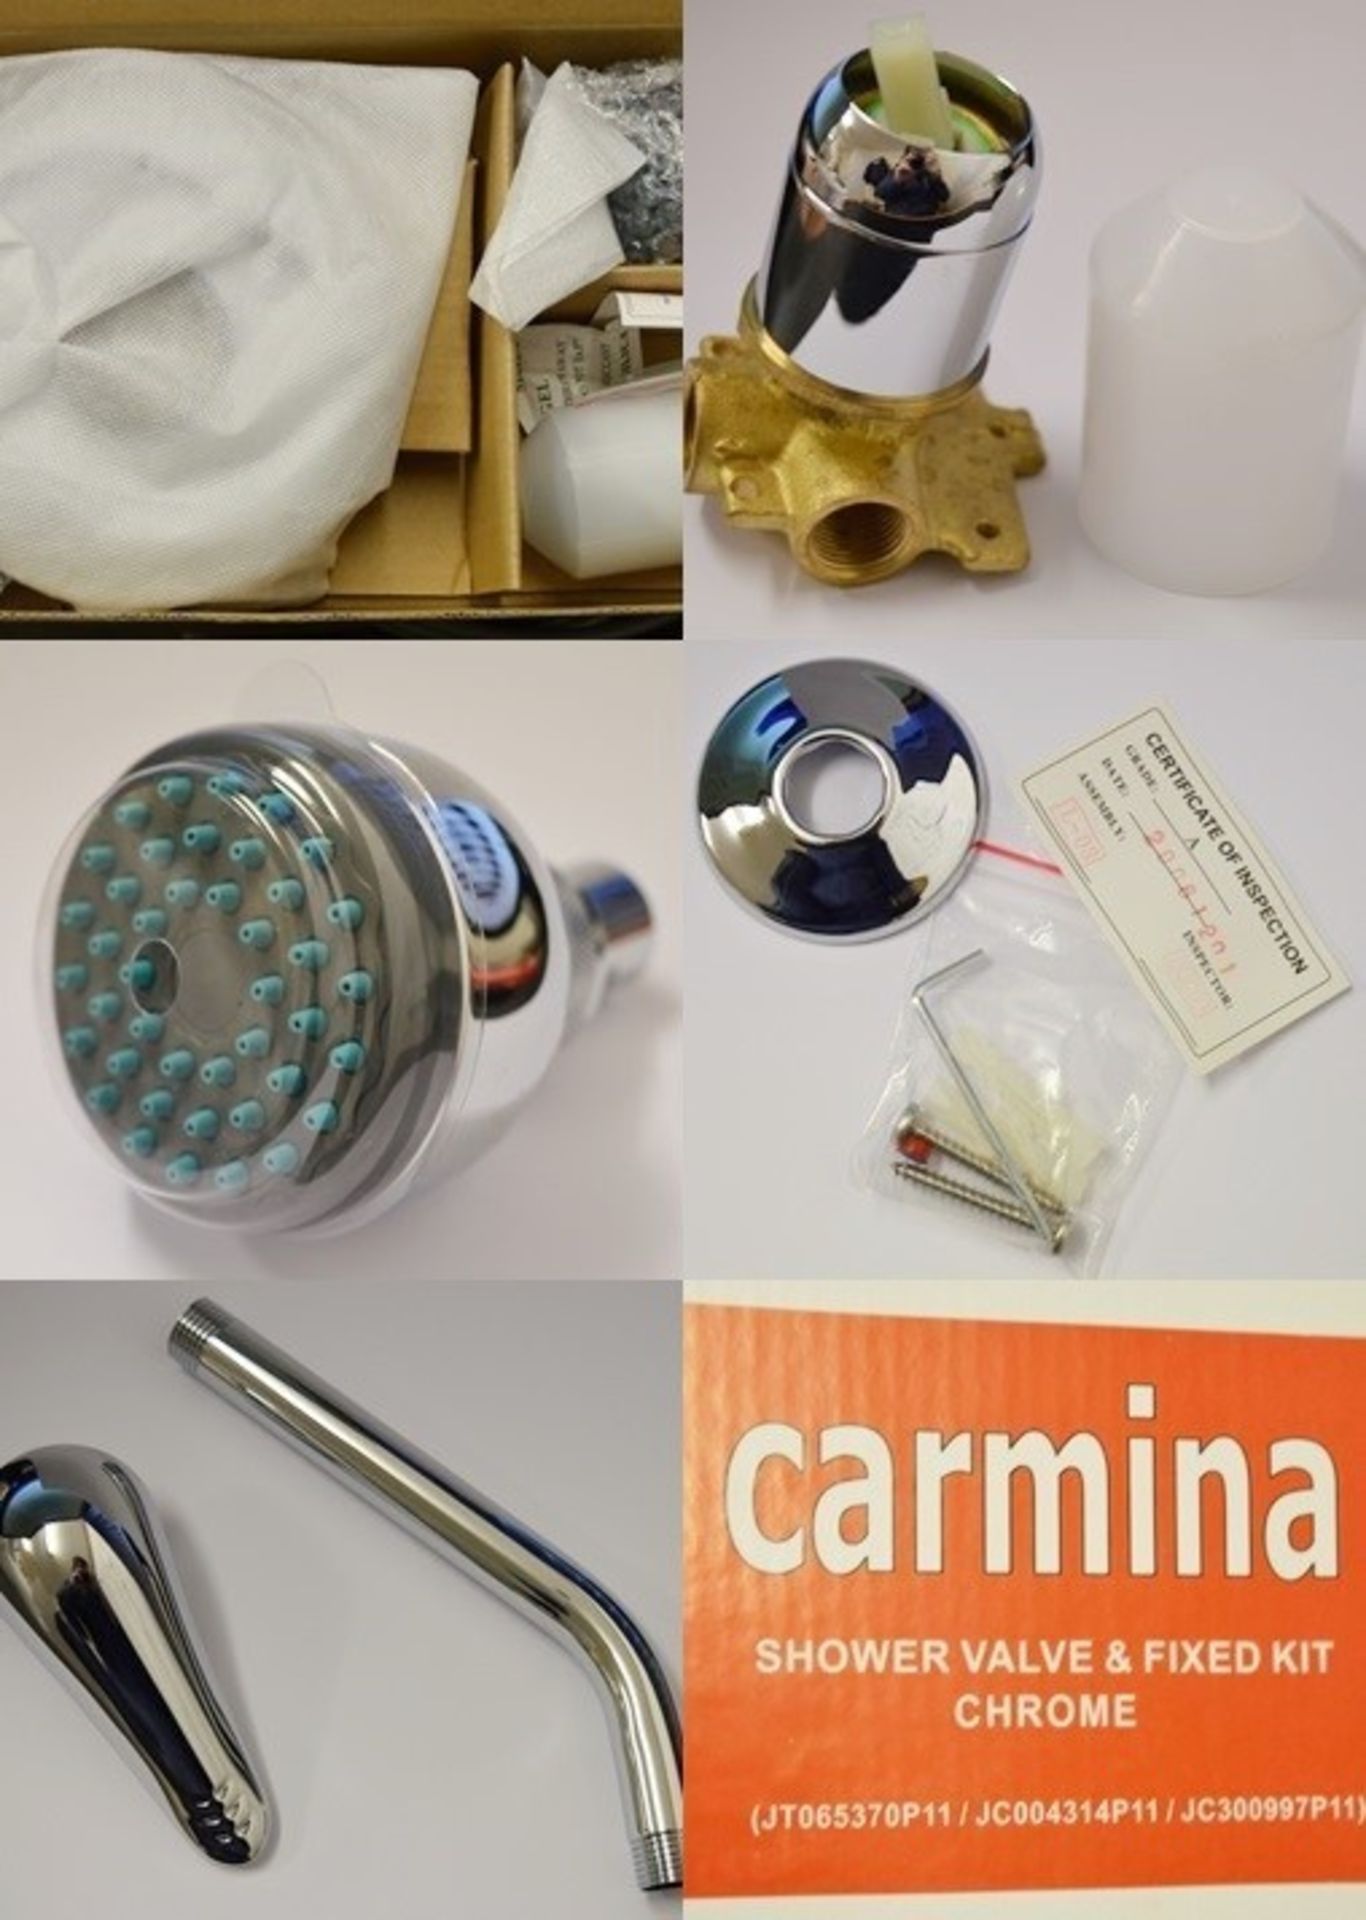 1 x Carmina Shower Valve Kit - Contains Chrome Shower Head, Fixed Arm and Manual Control - Brass - Image 2 of 16